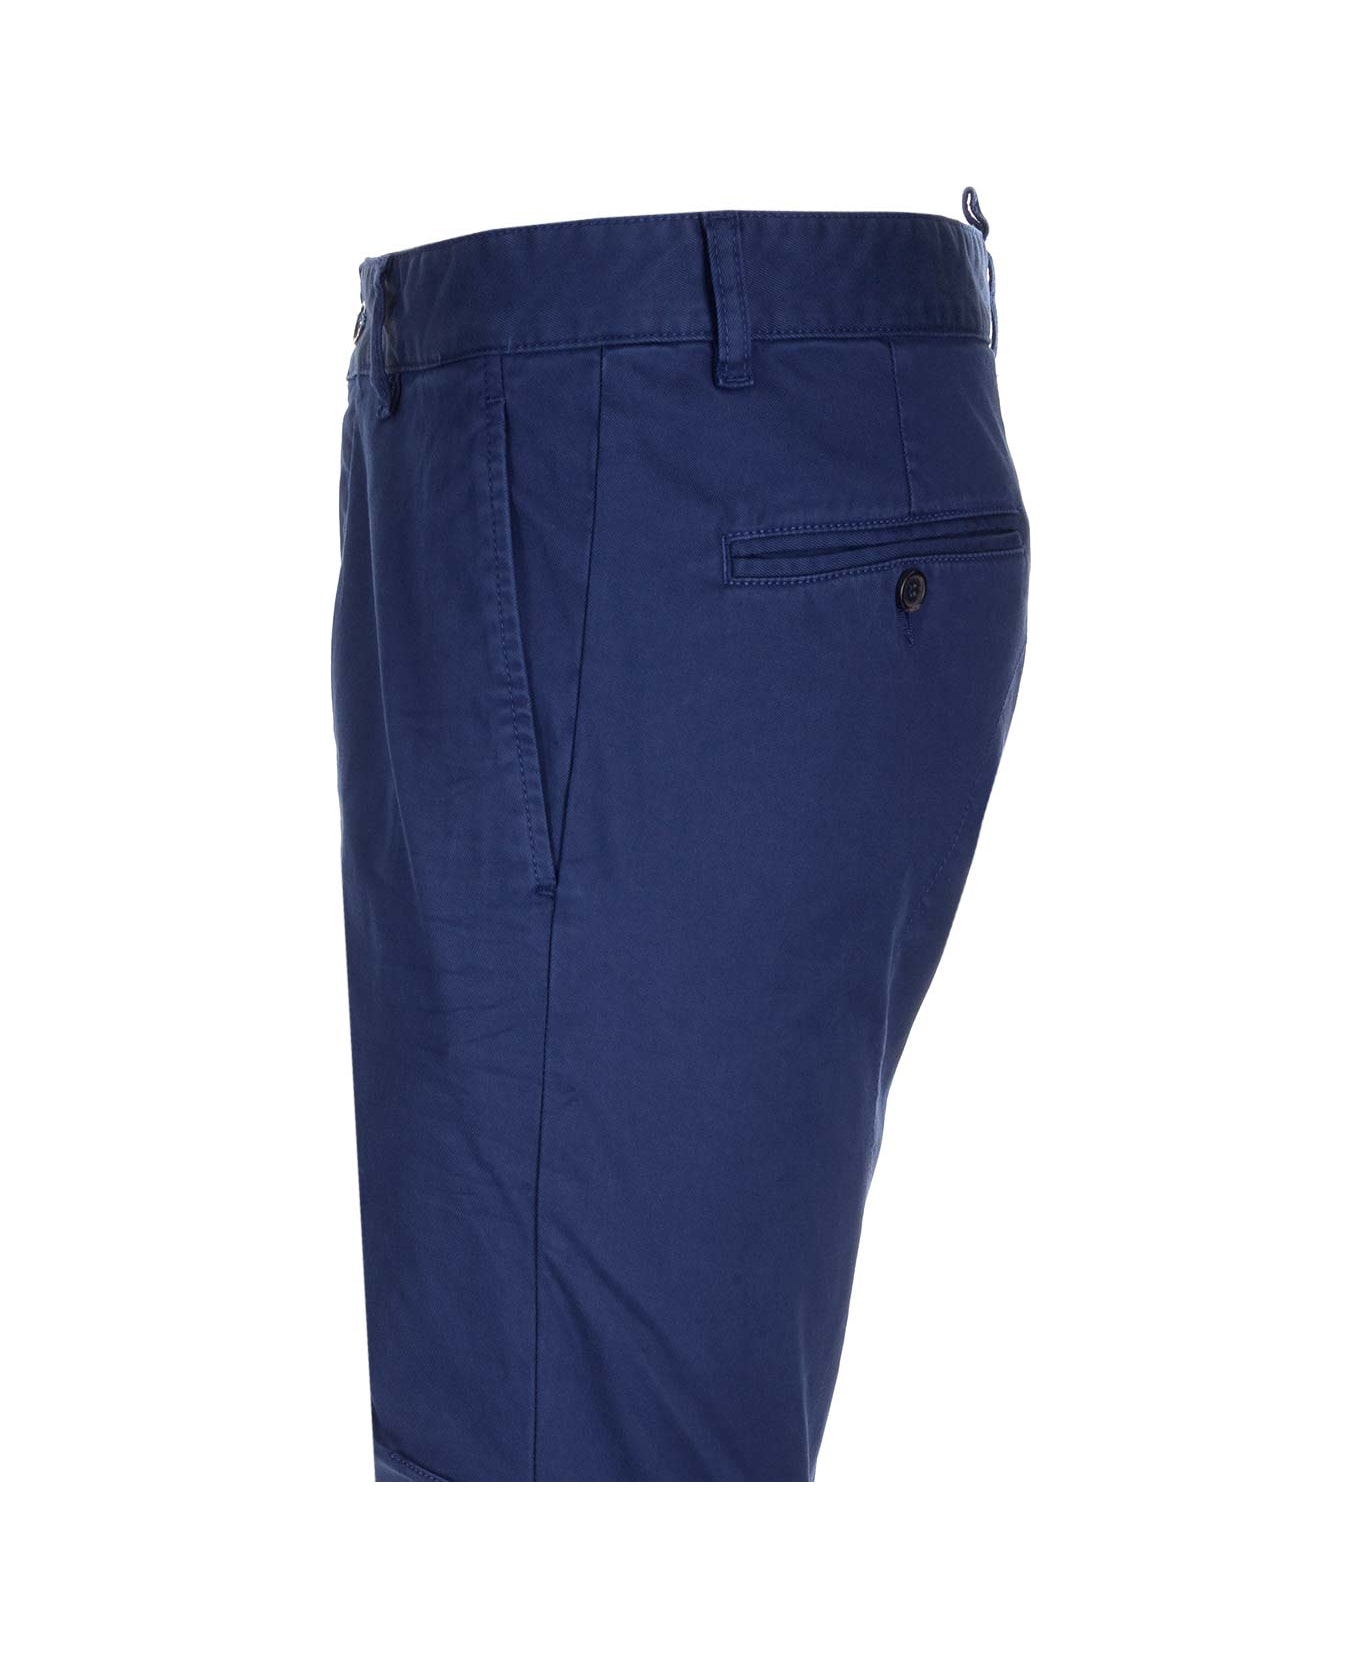 Dsquared2 Sexy Chino Pants - Navy